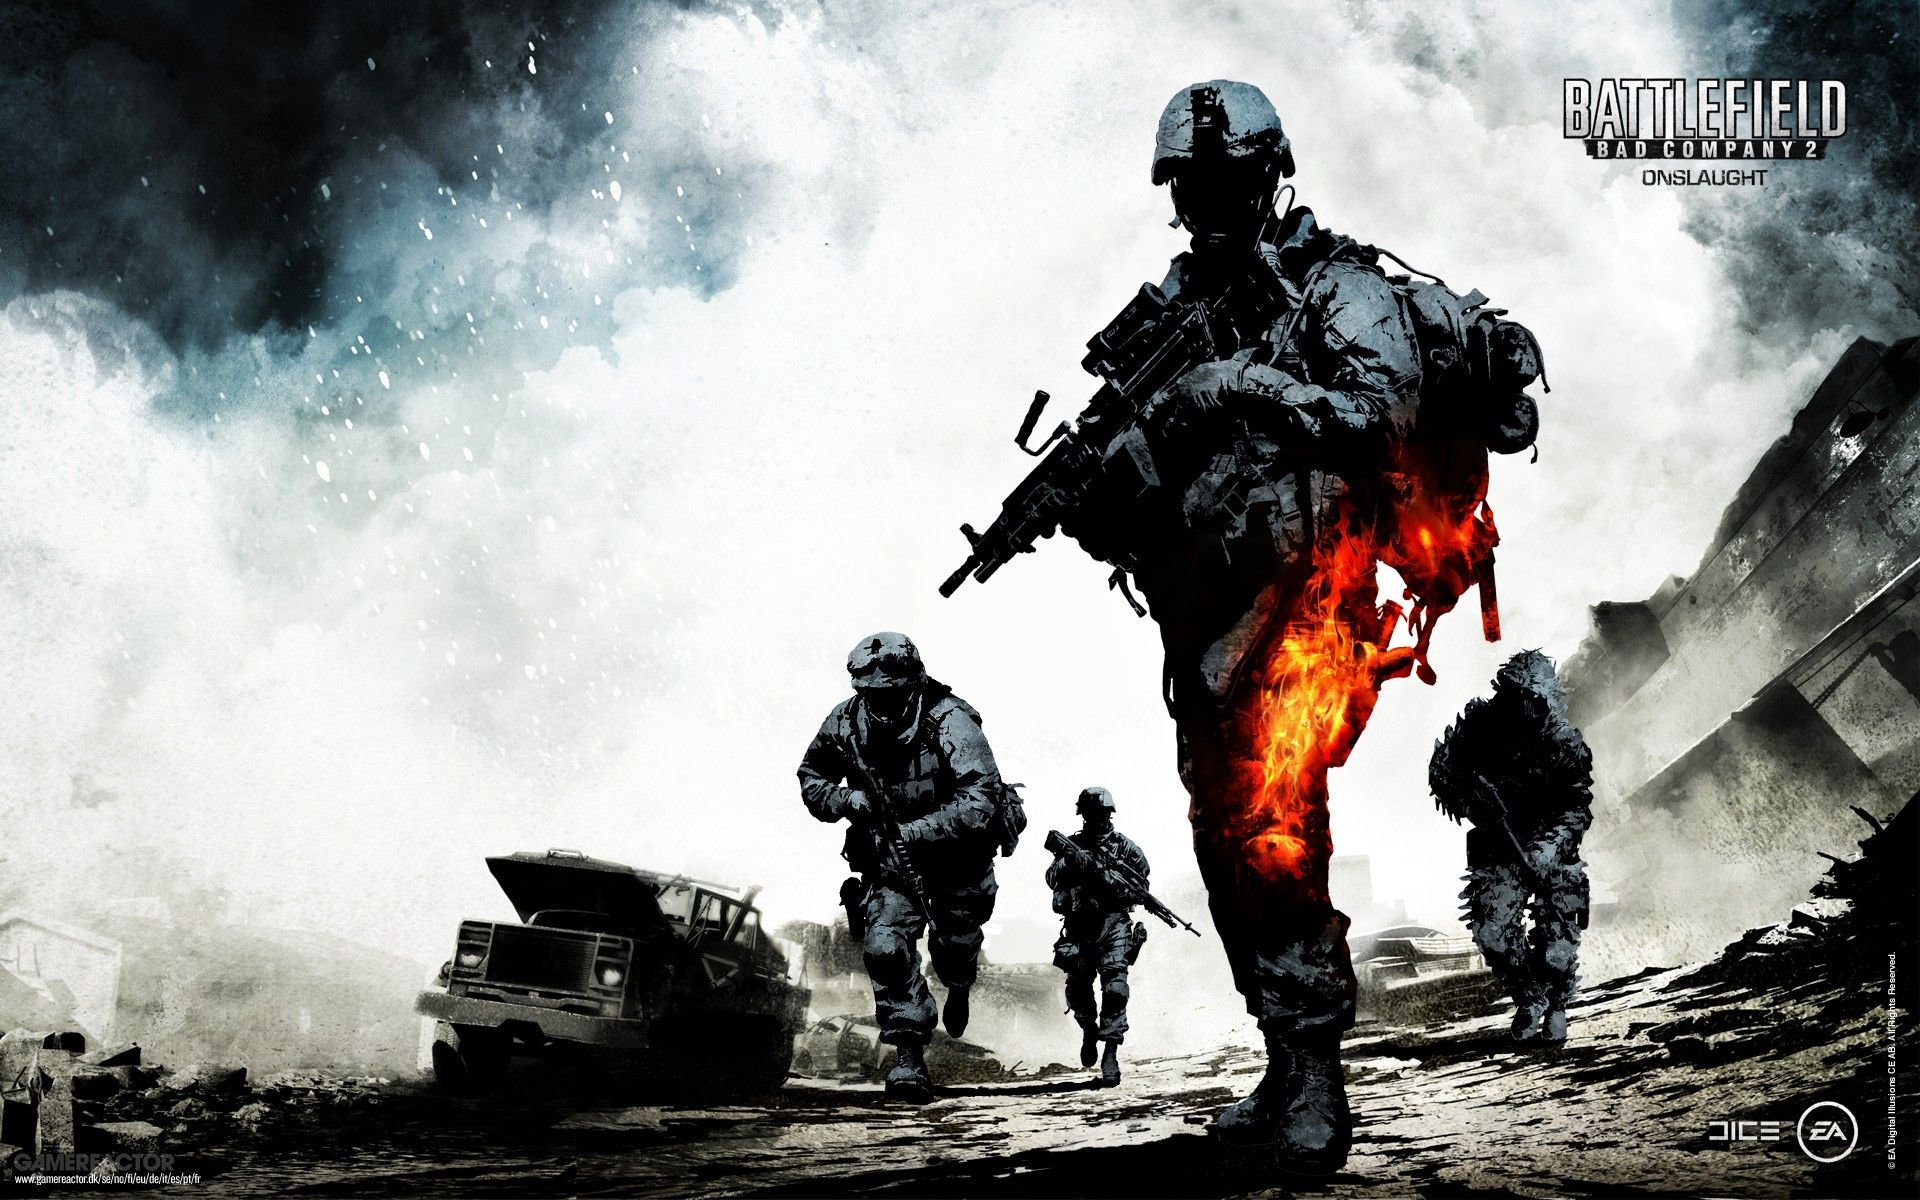 Rumour: Battlefield 6 might not have any singleplayer